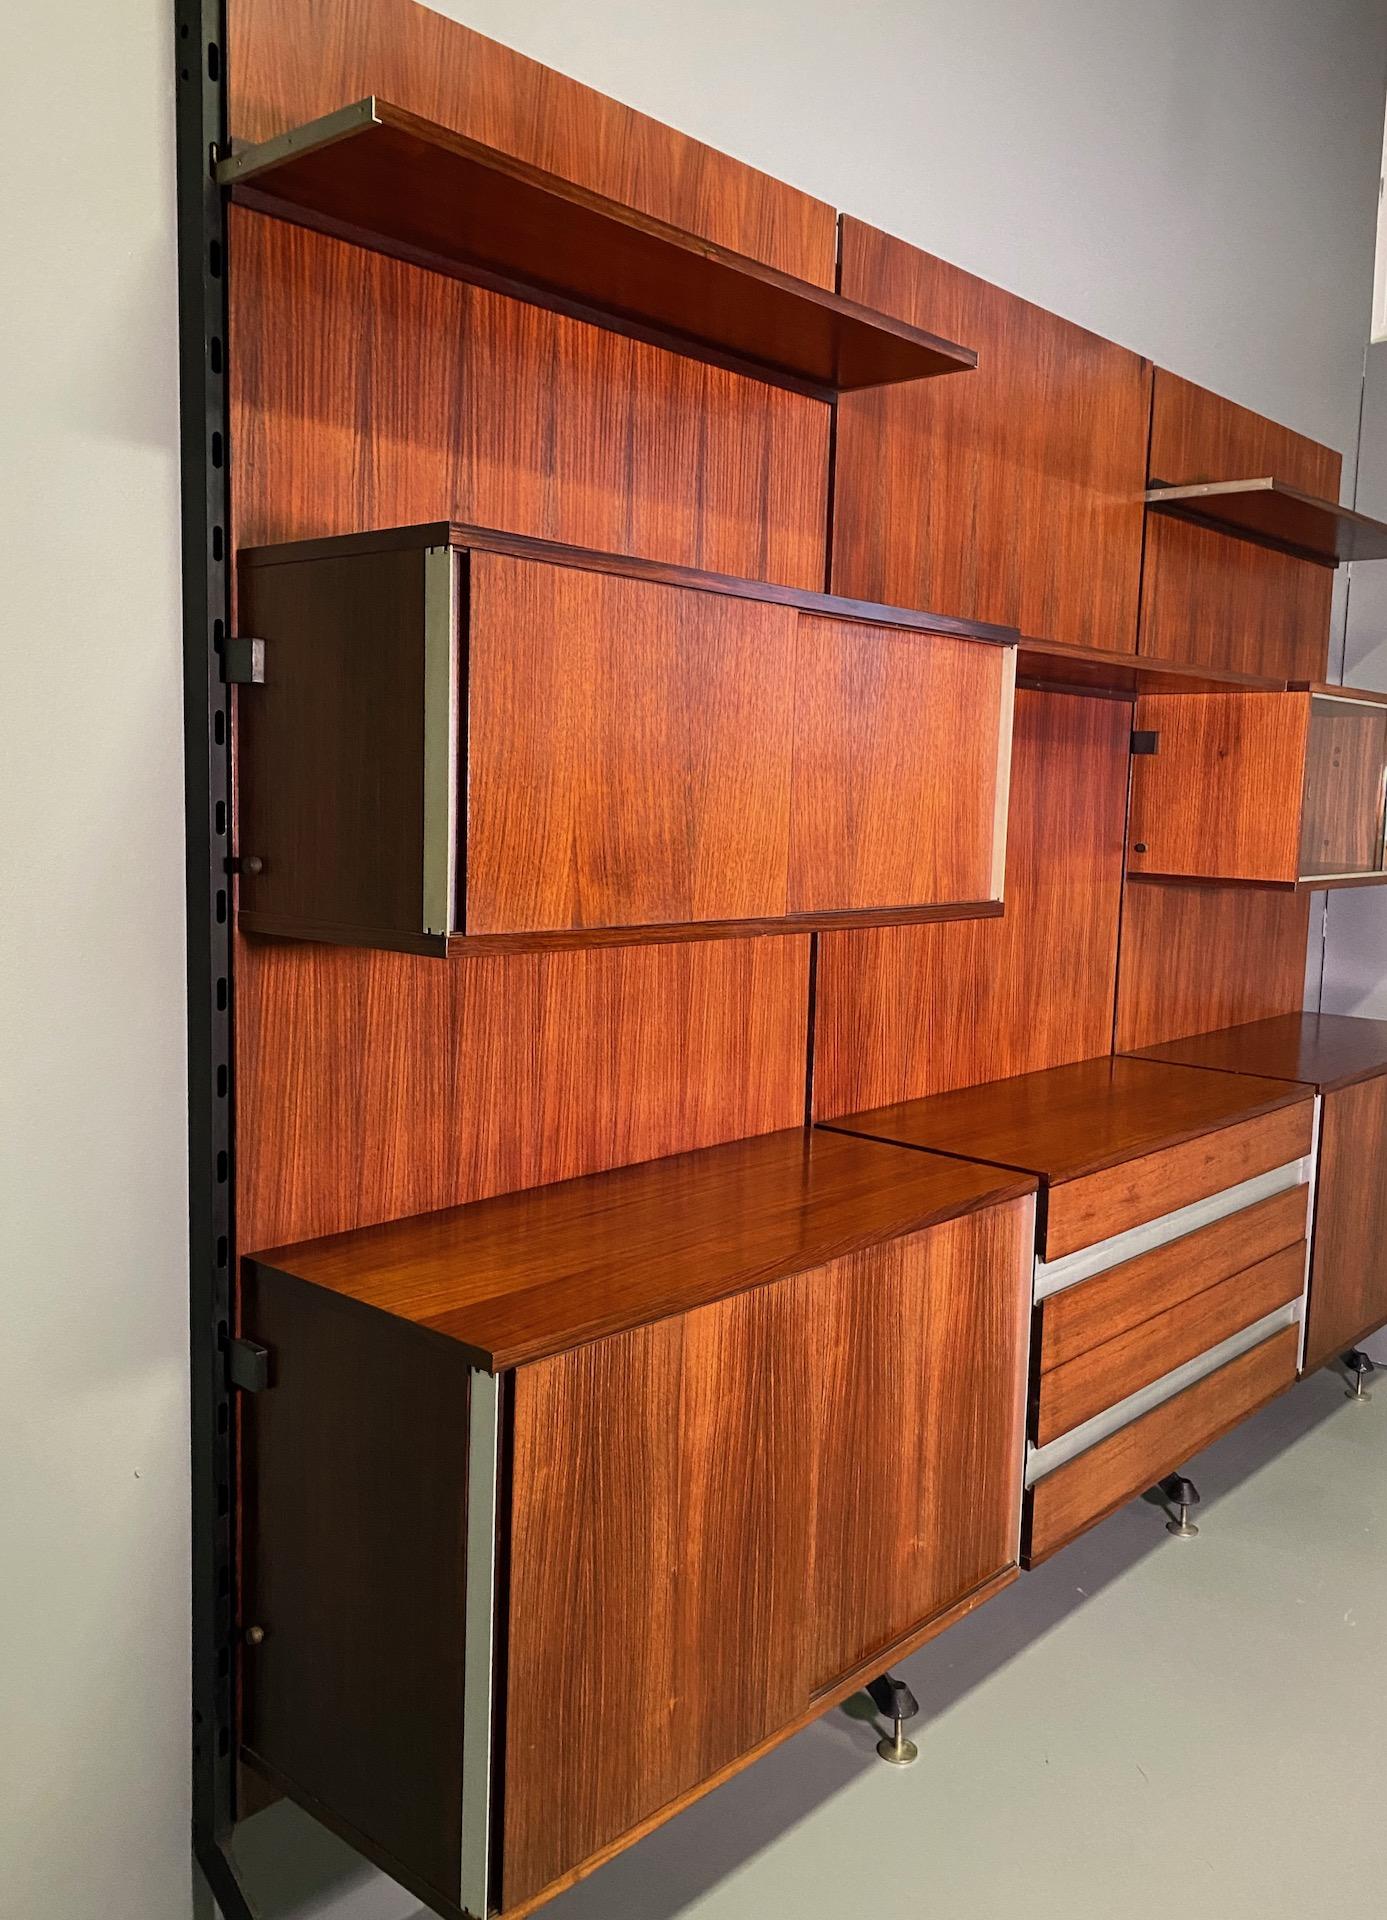 Urio wall system in palisander wood designed in 1957 by Ico Parisi for MIM Roma, Italy. Different elements including shelves, desk, chest of drawers and cupboards with sliding doors.